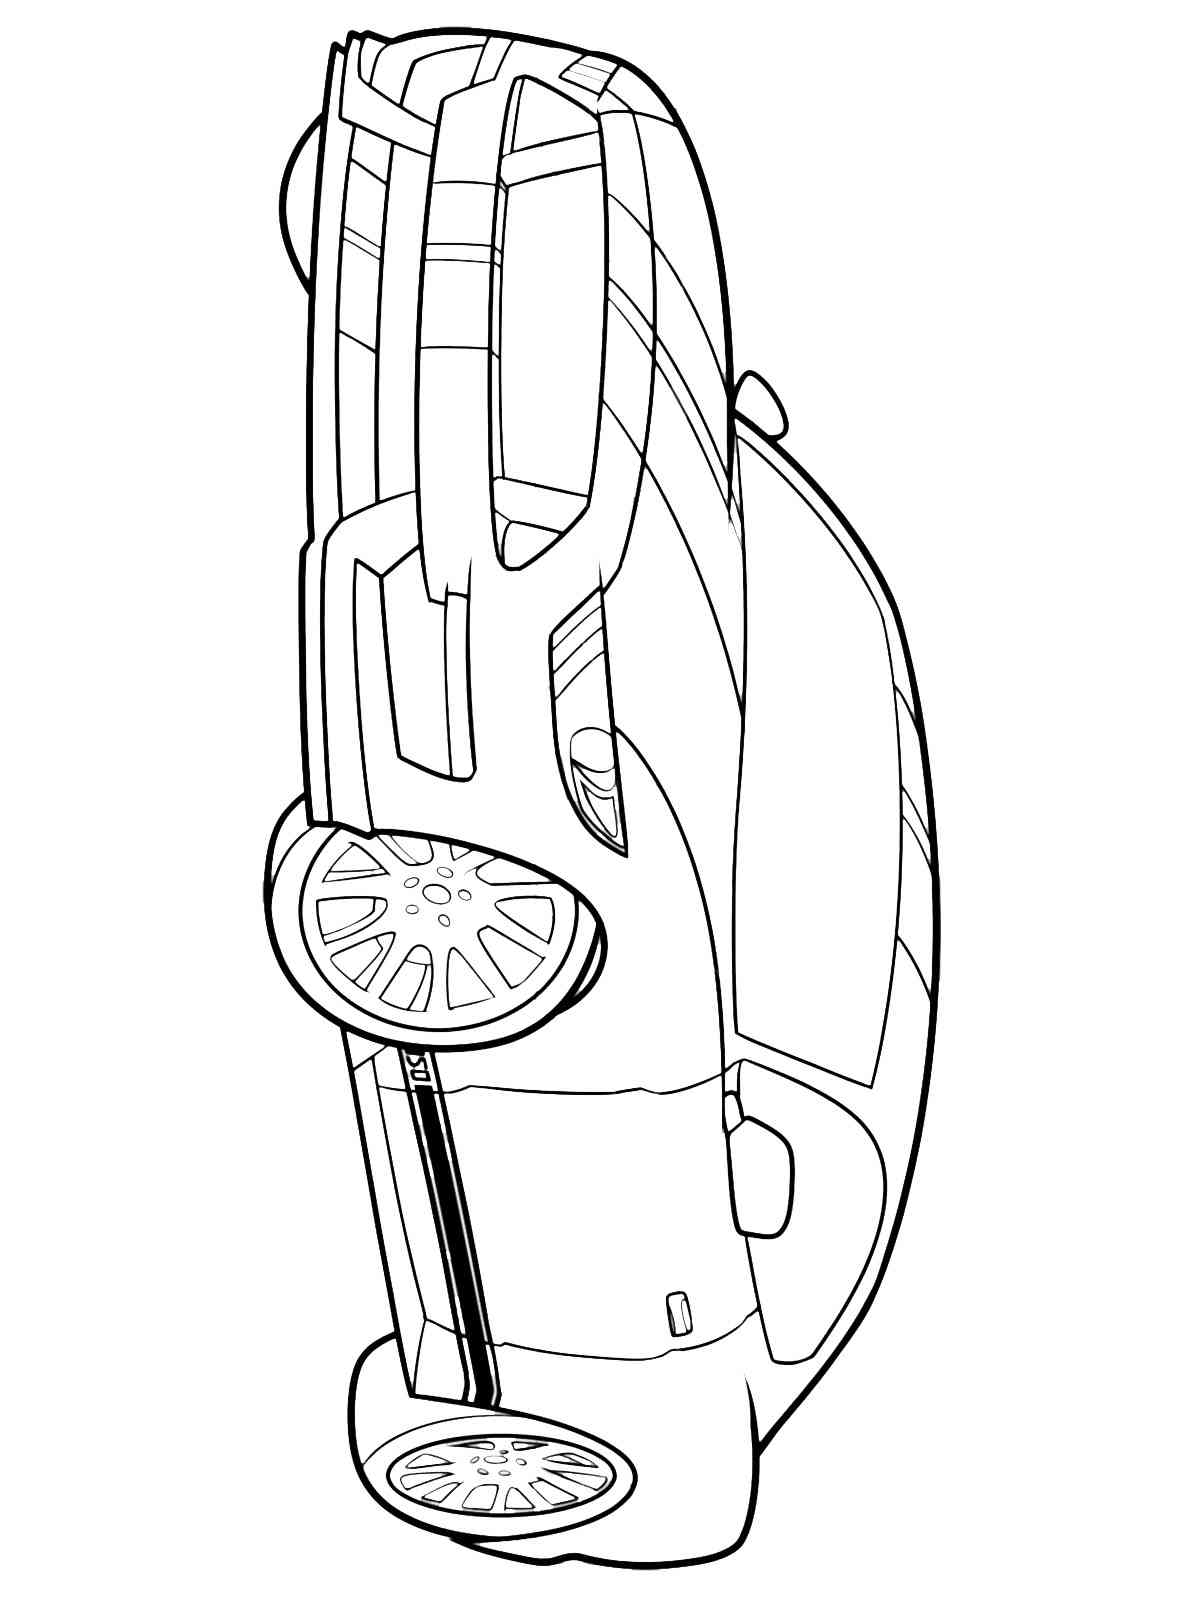 Ford Mustang coloring pages